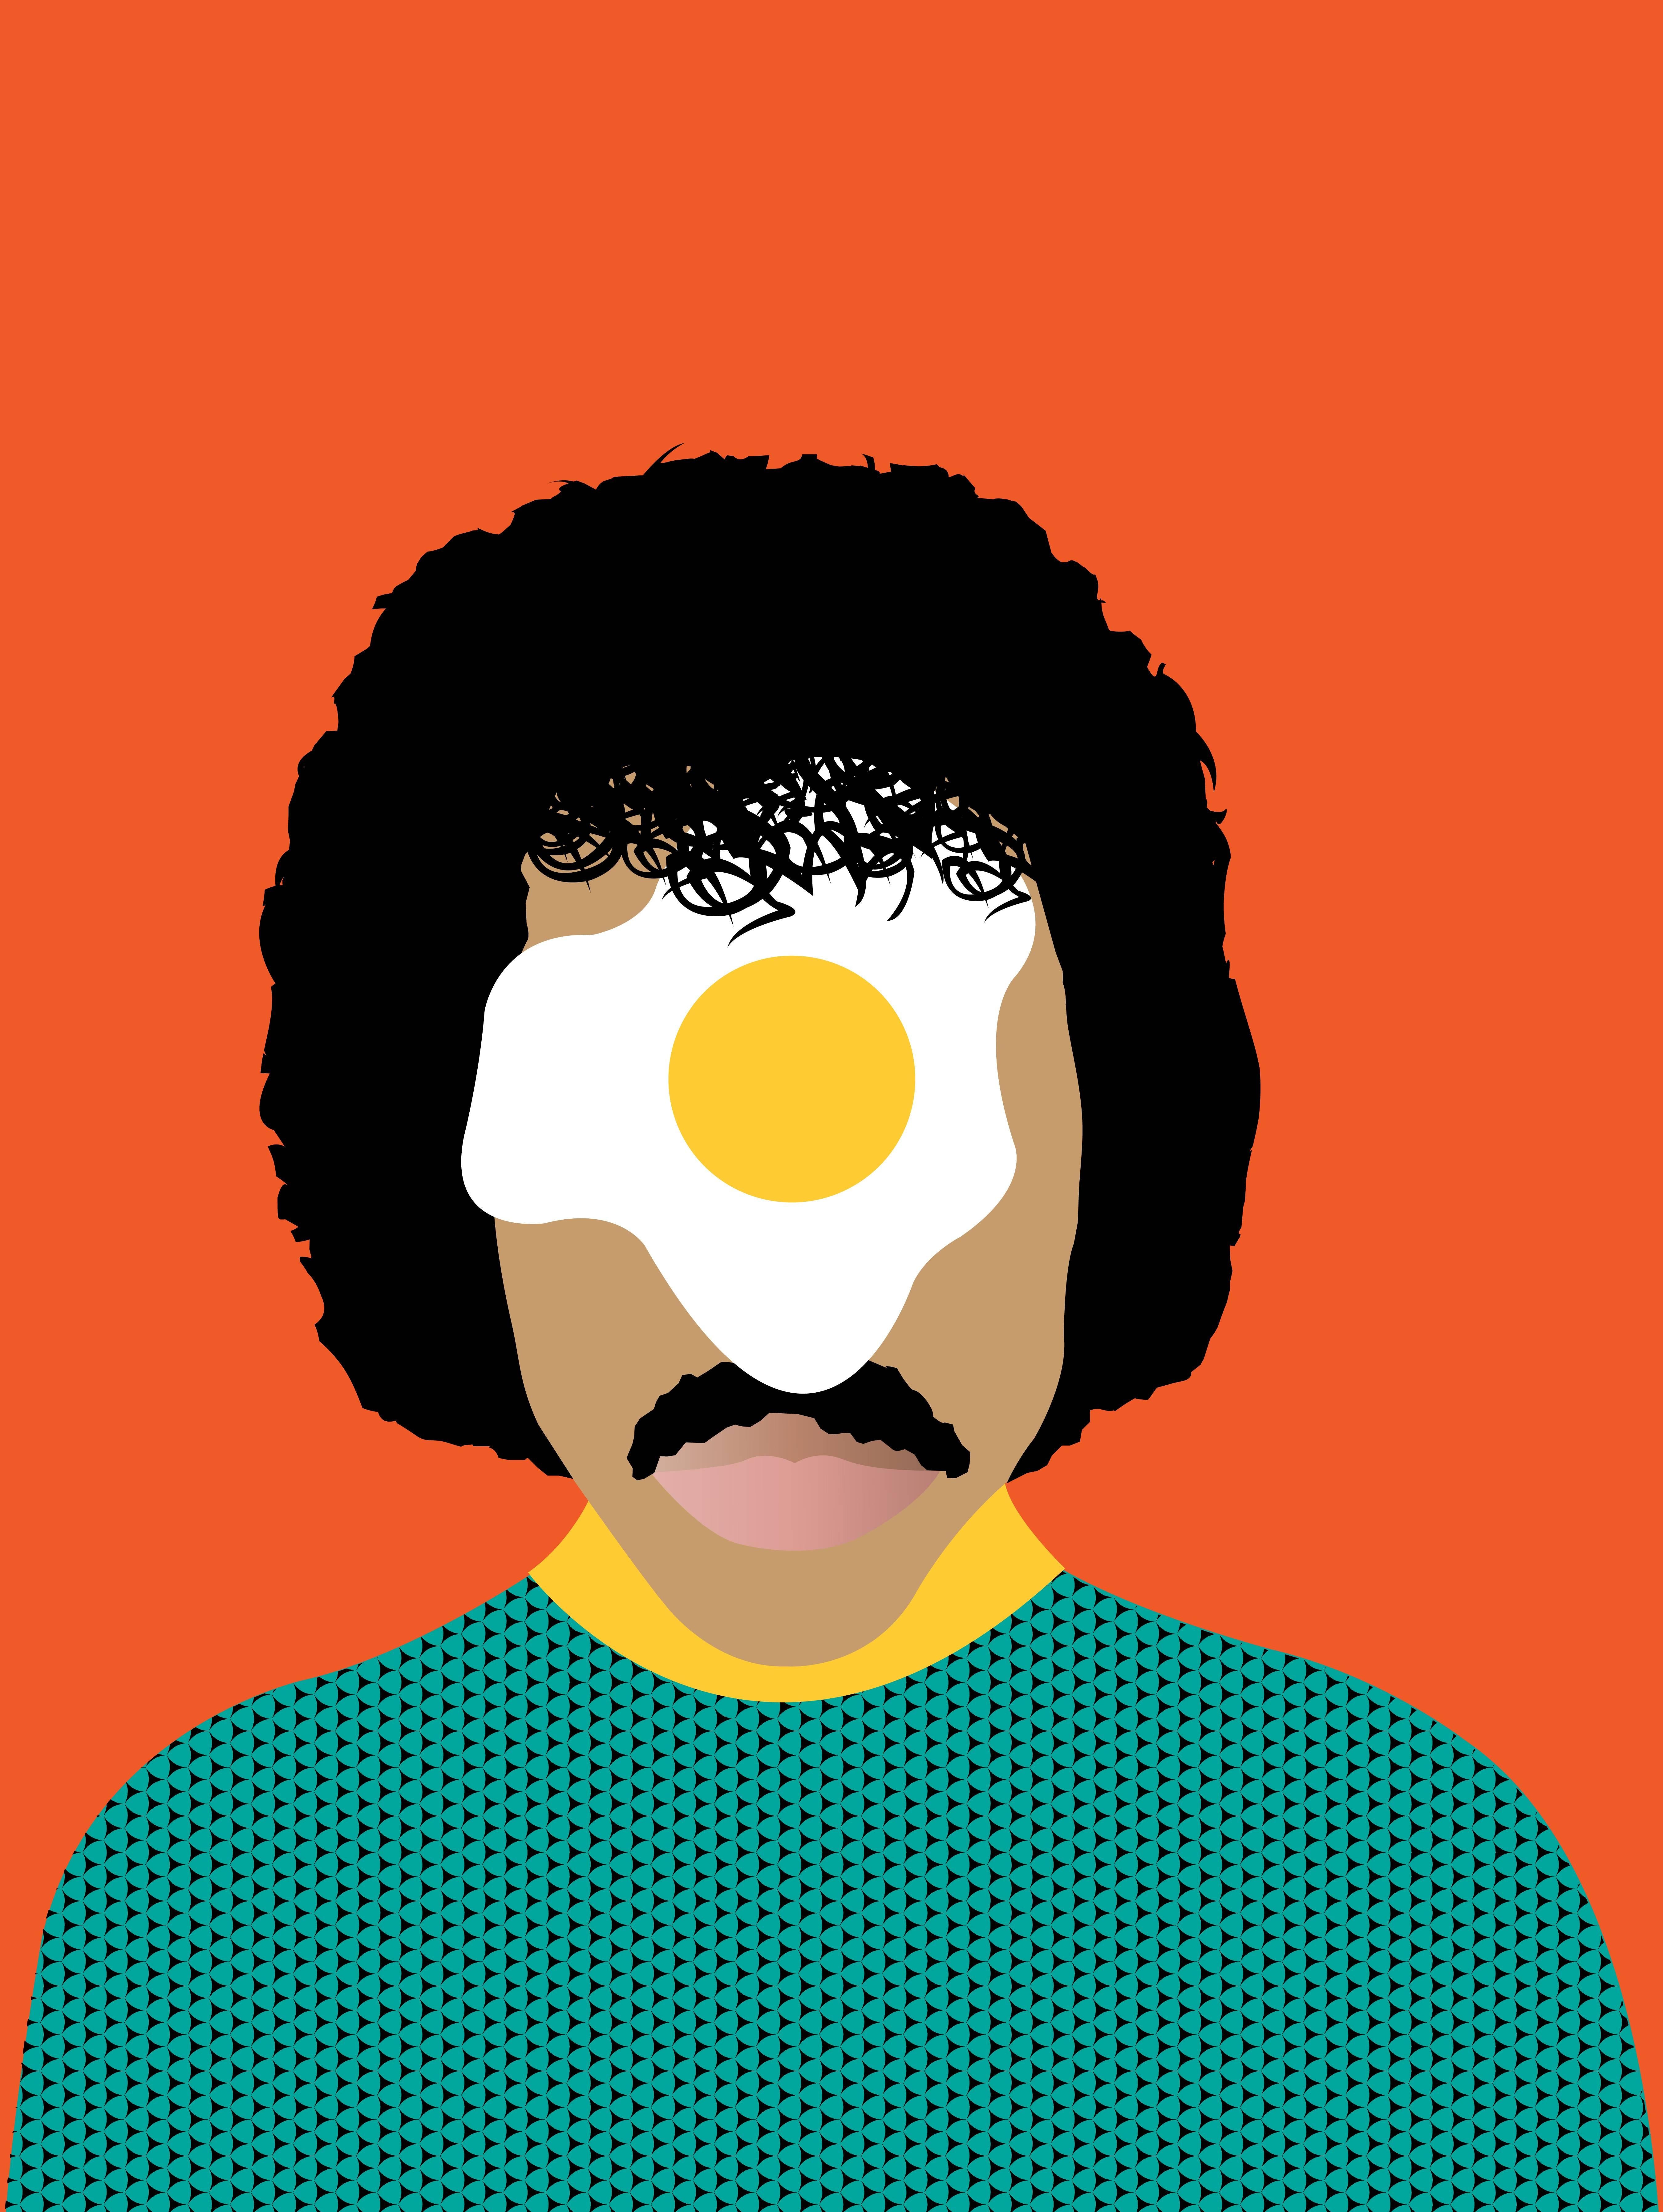 Lionel Richie: Over Easy Like Sunday Morning - Print by Avery Nejam